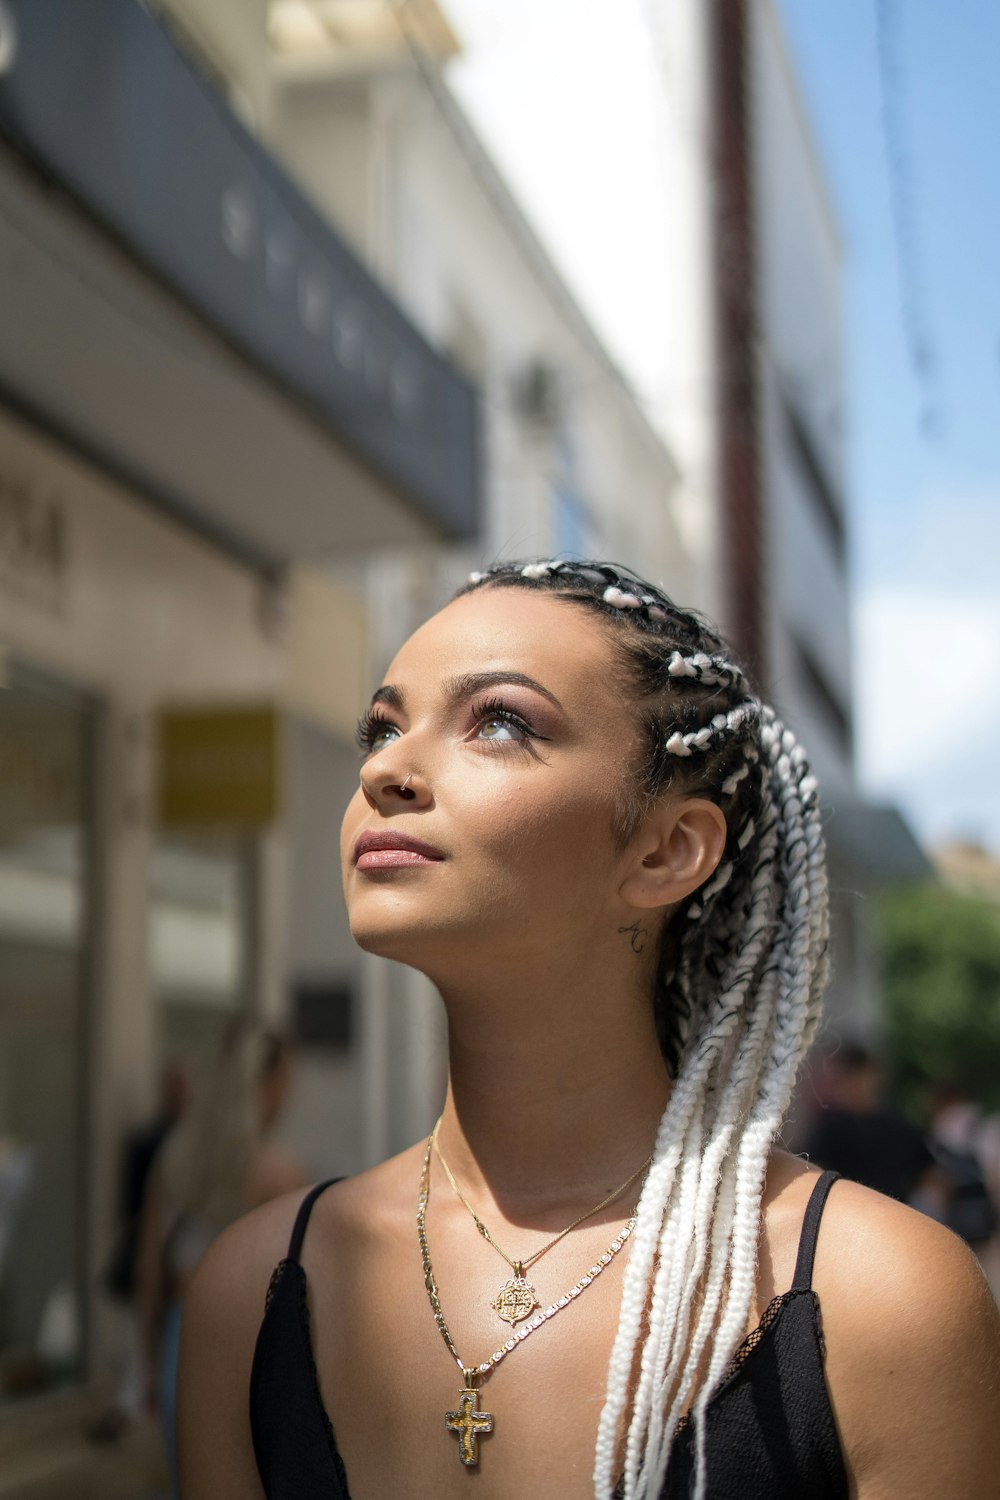 a woman with braids standing on a city street